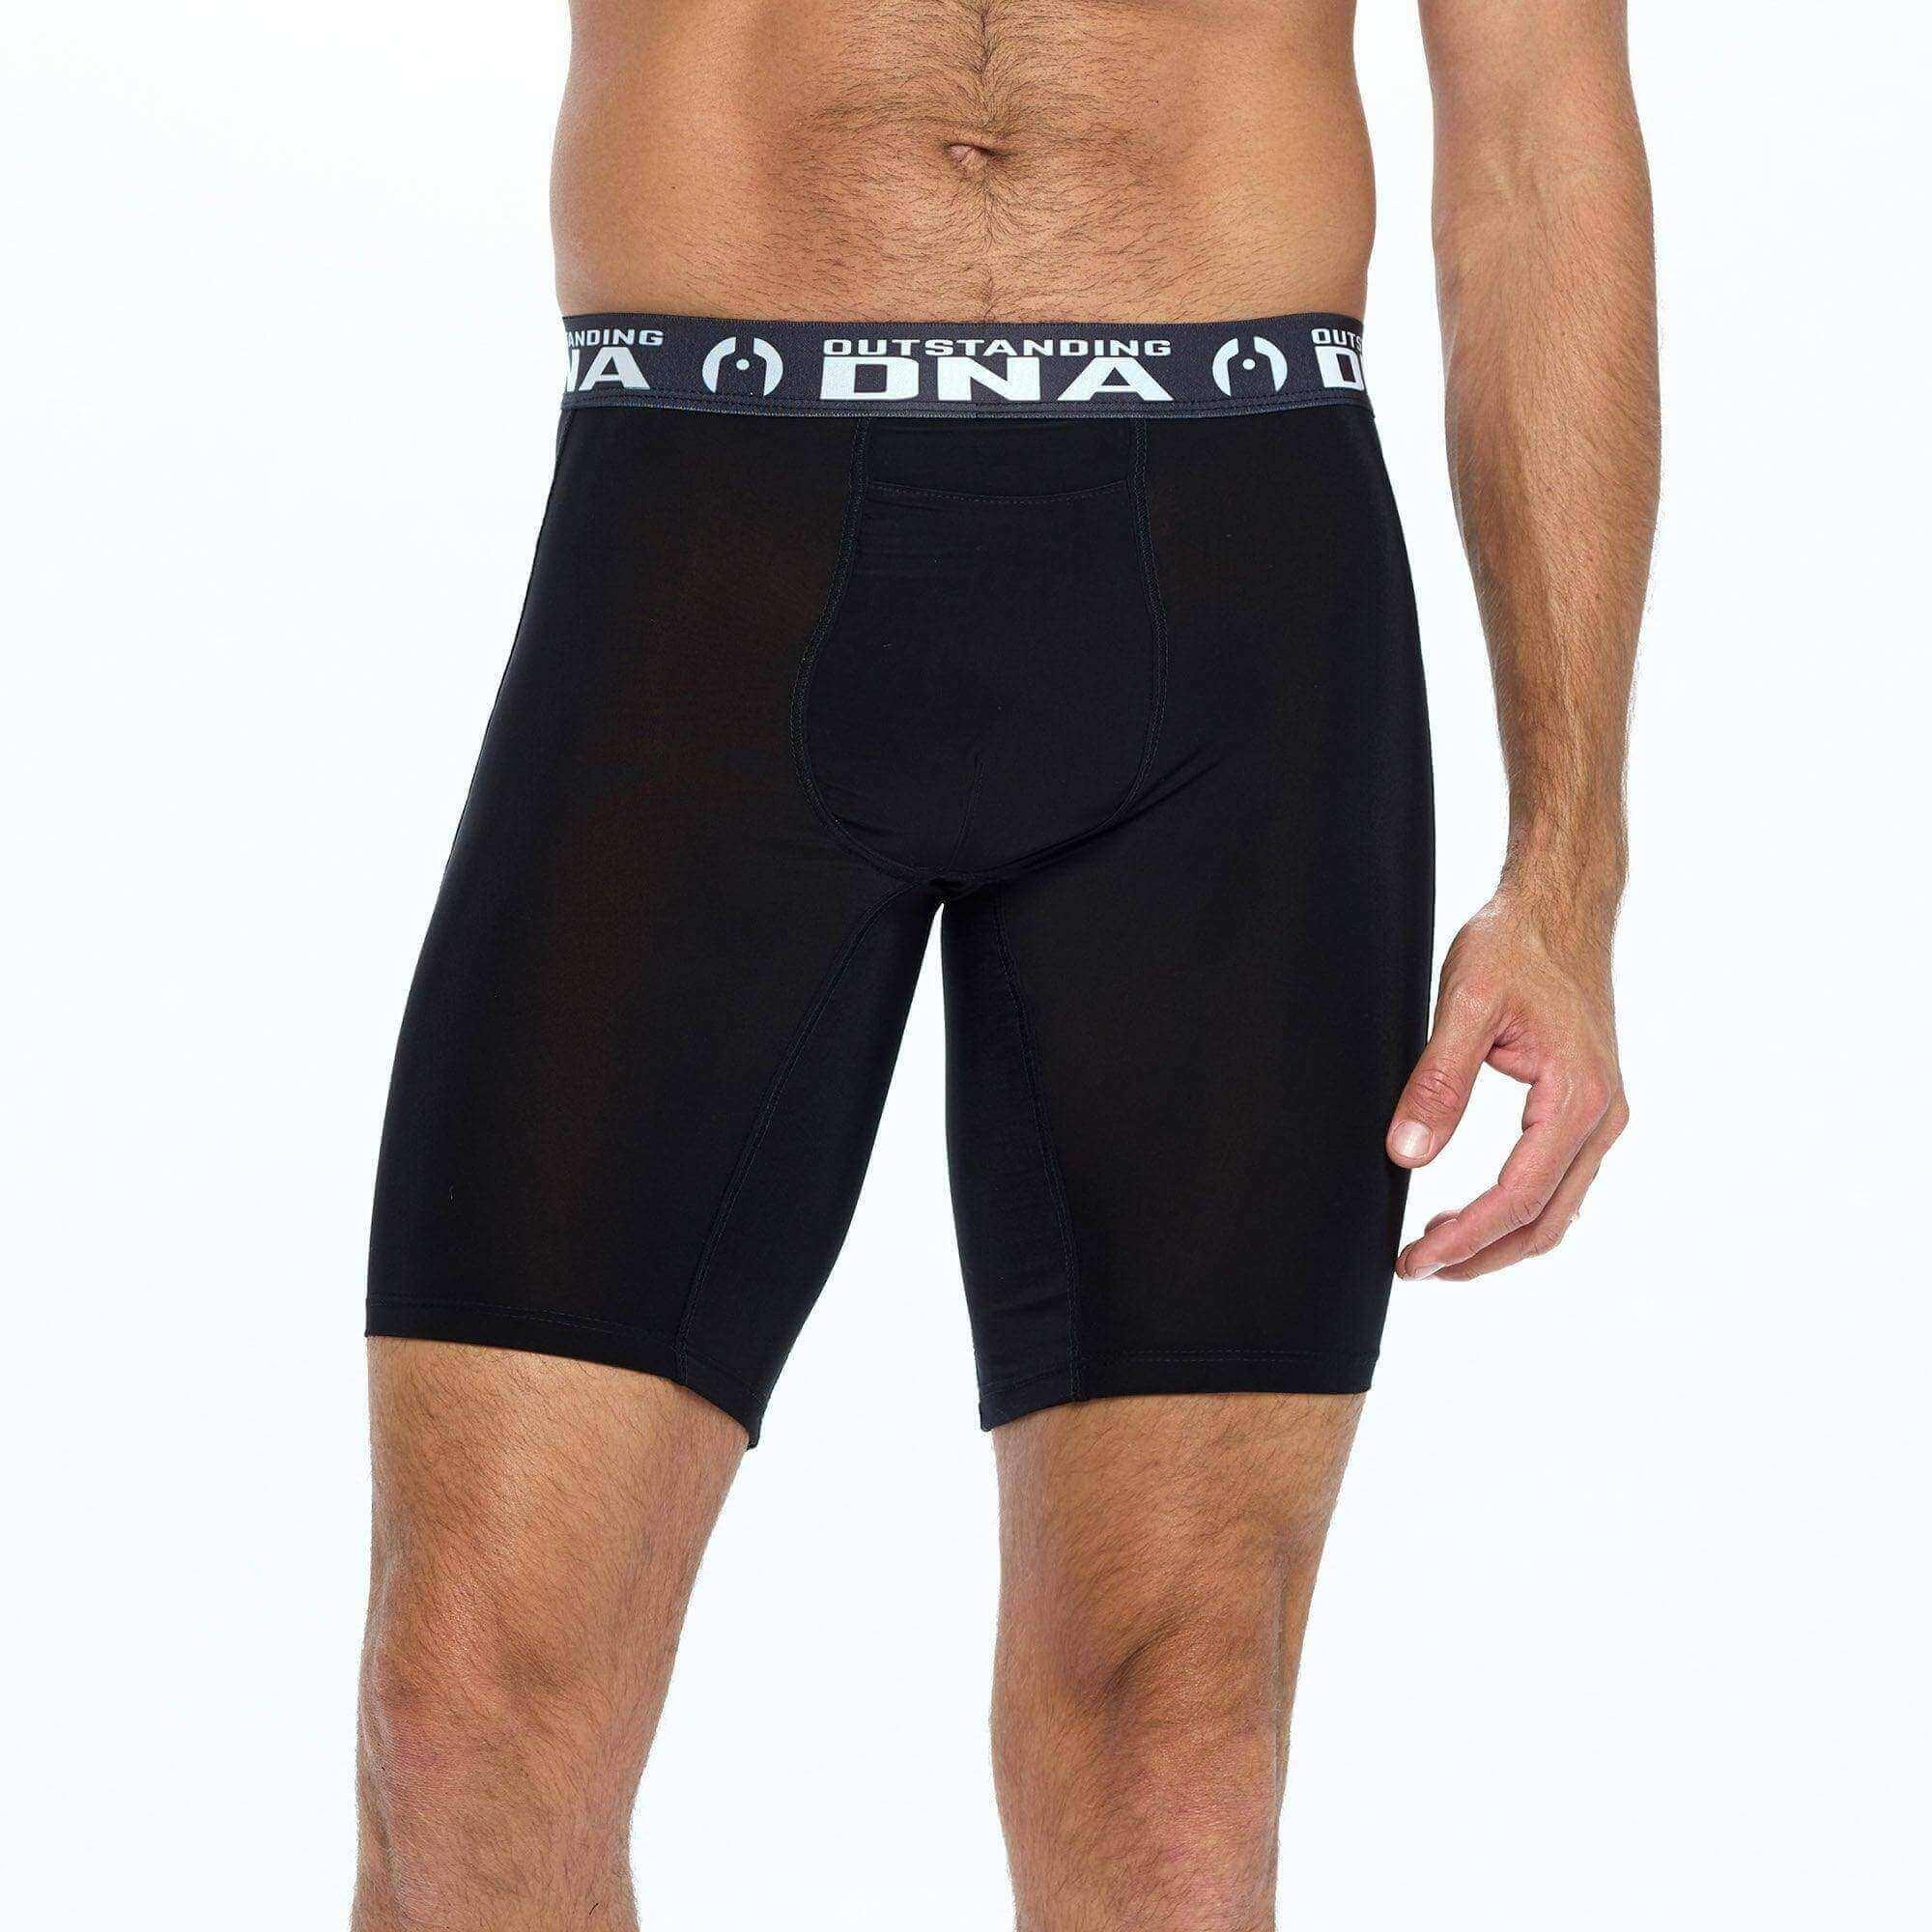 Mens Anti Chafing Underwear Male Fashion Underpants Sexy